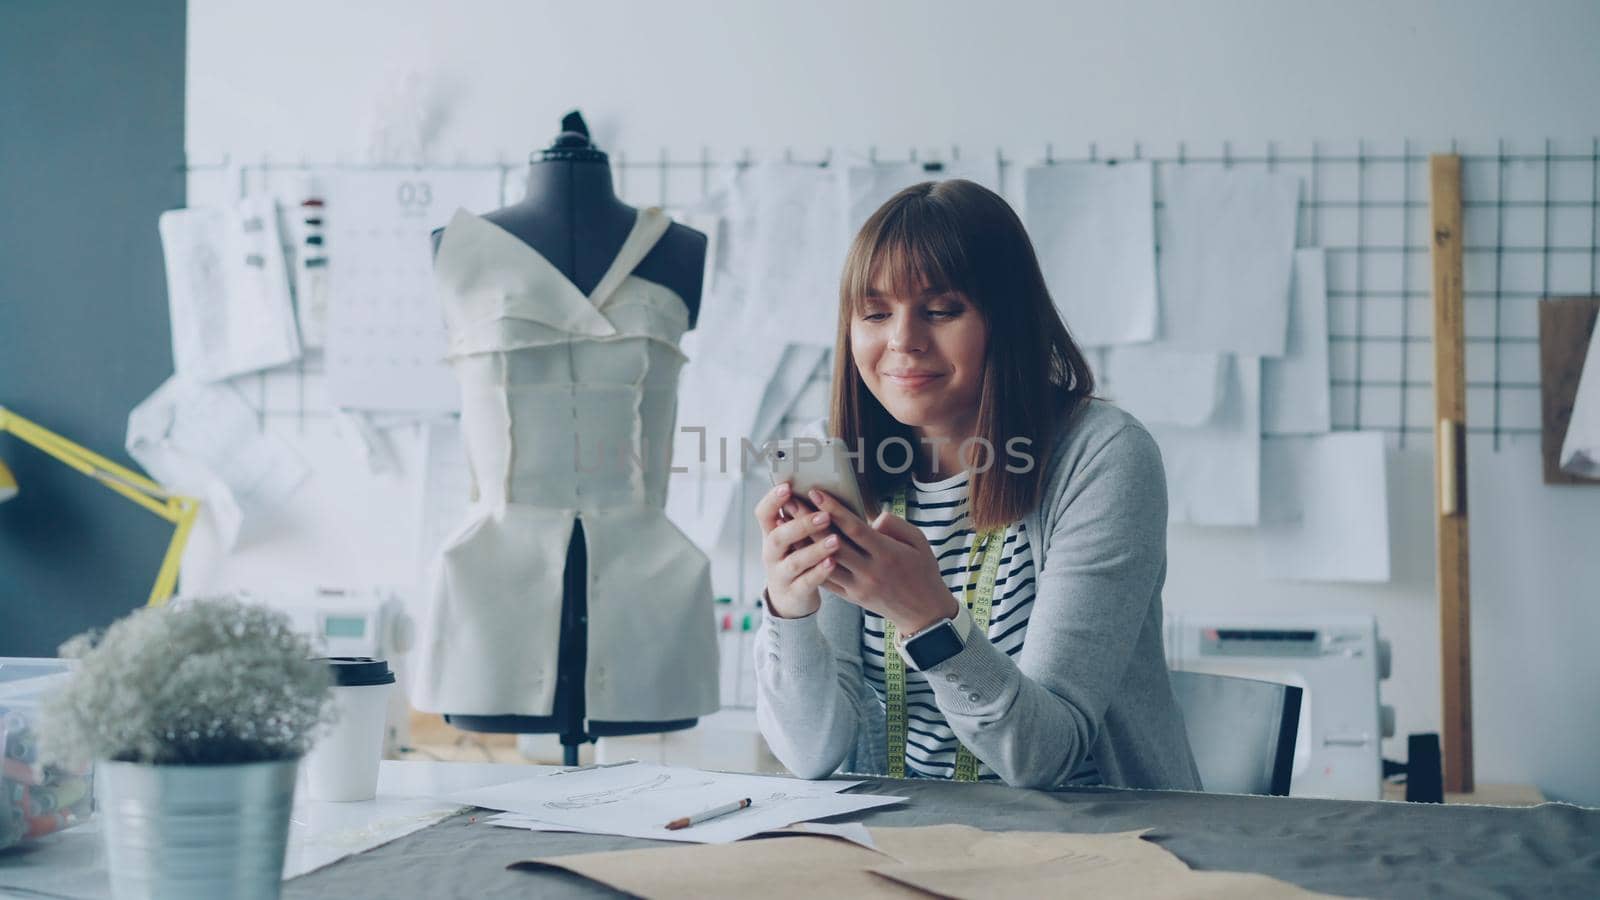 Creative clothing designer is looking at smartphone screen and drawing sketch while working in modern tailor shop at sewing table. Woman is busy and involved in process.